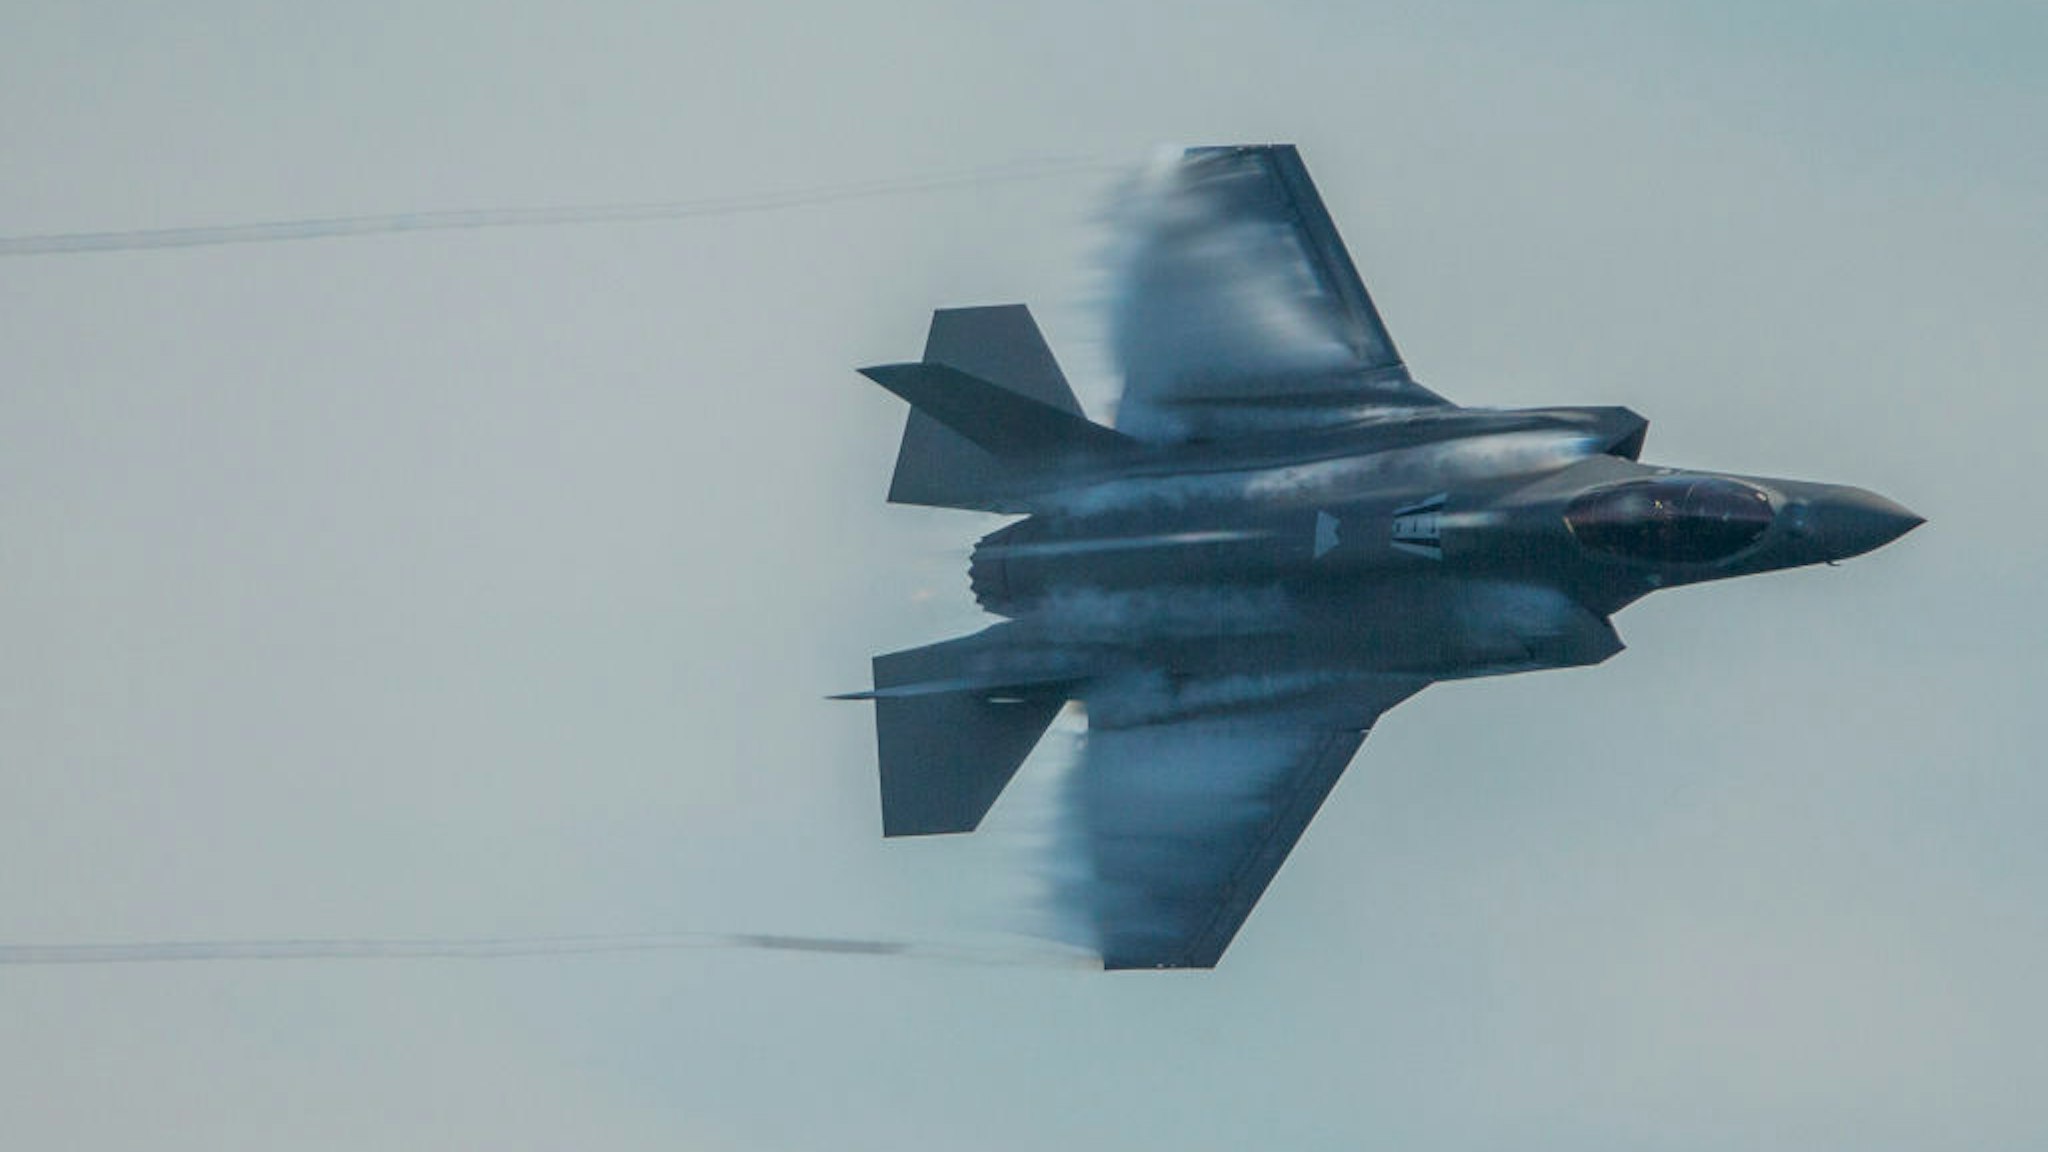 TORONTO, ON - SEPTEMBER 3: USAF F-35 shows vapour cloud forming as it performs a high speed turn. The Canadian International Air Show returned to the Toronto waterfront with a 3 hour show ending with a USAF F-35 Demonstration team. CORONAPD Toronto Star. (Rick Madonik/Toronto Star via Getty Images)